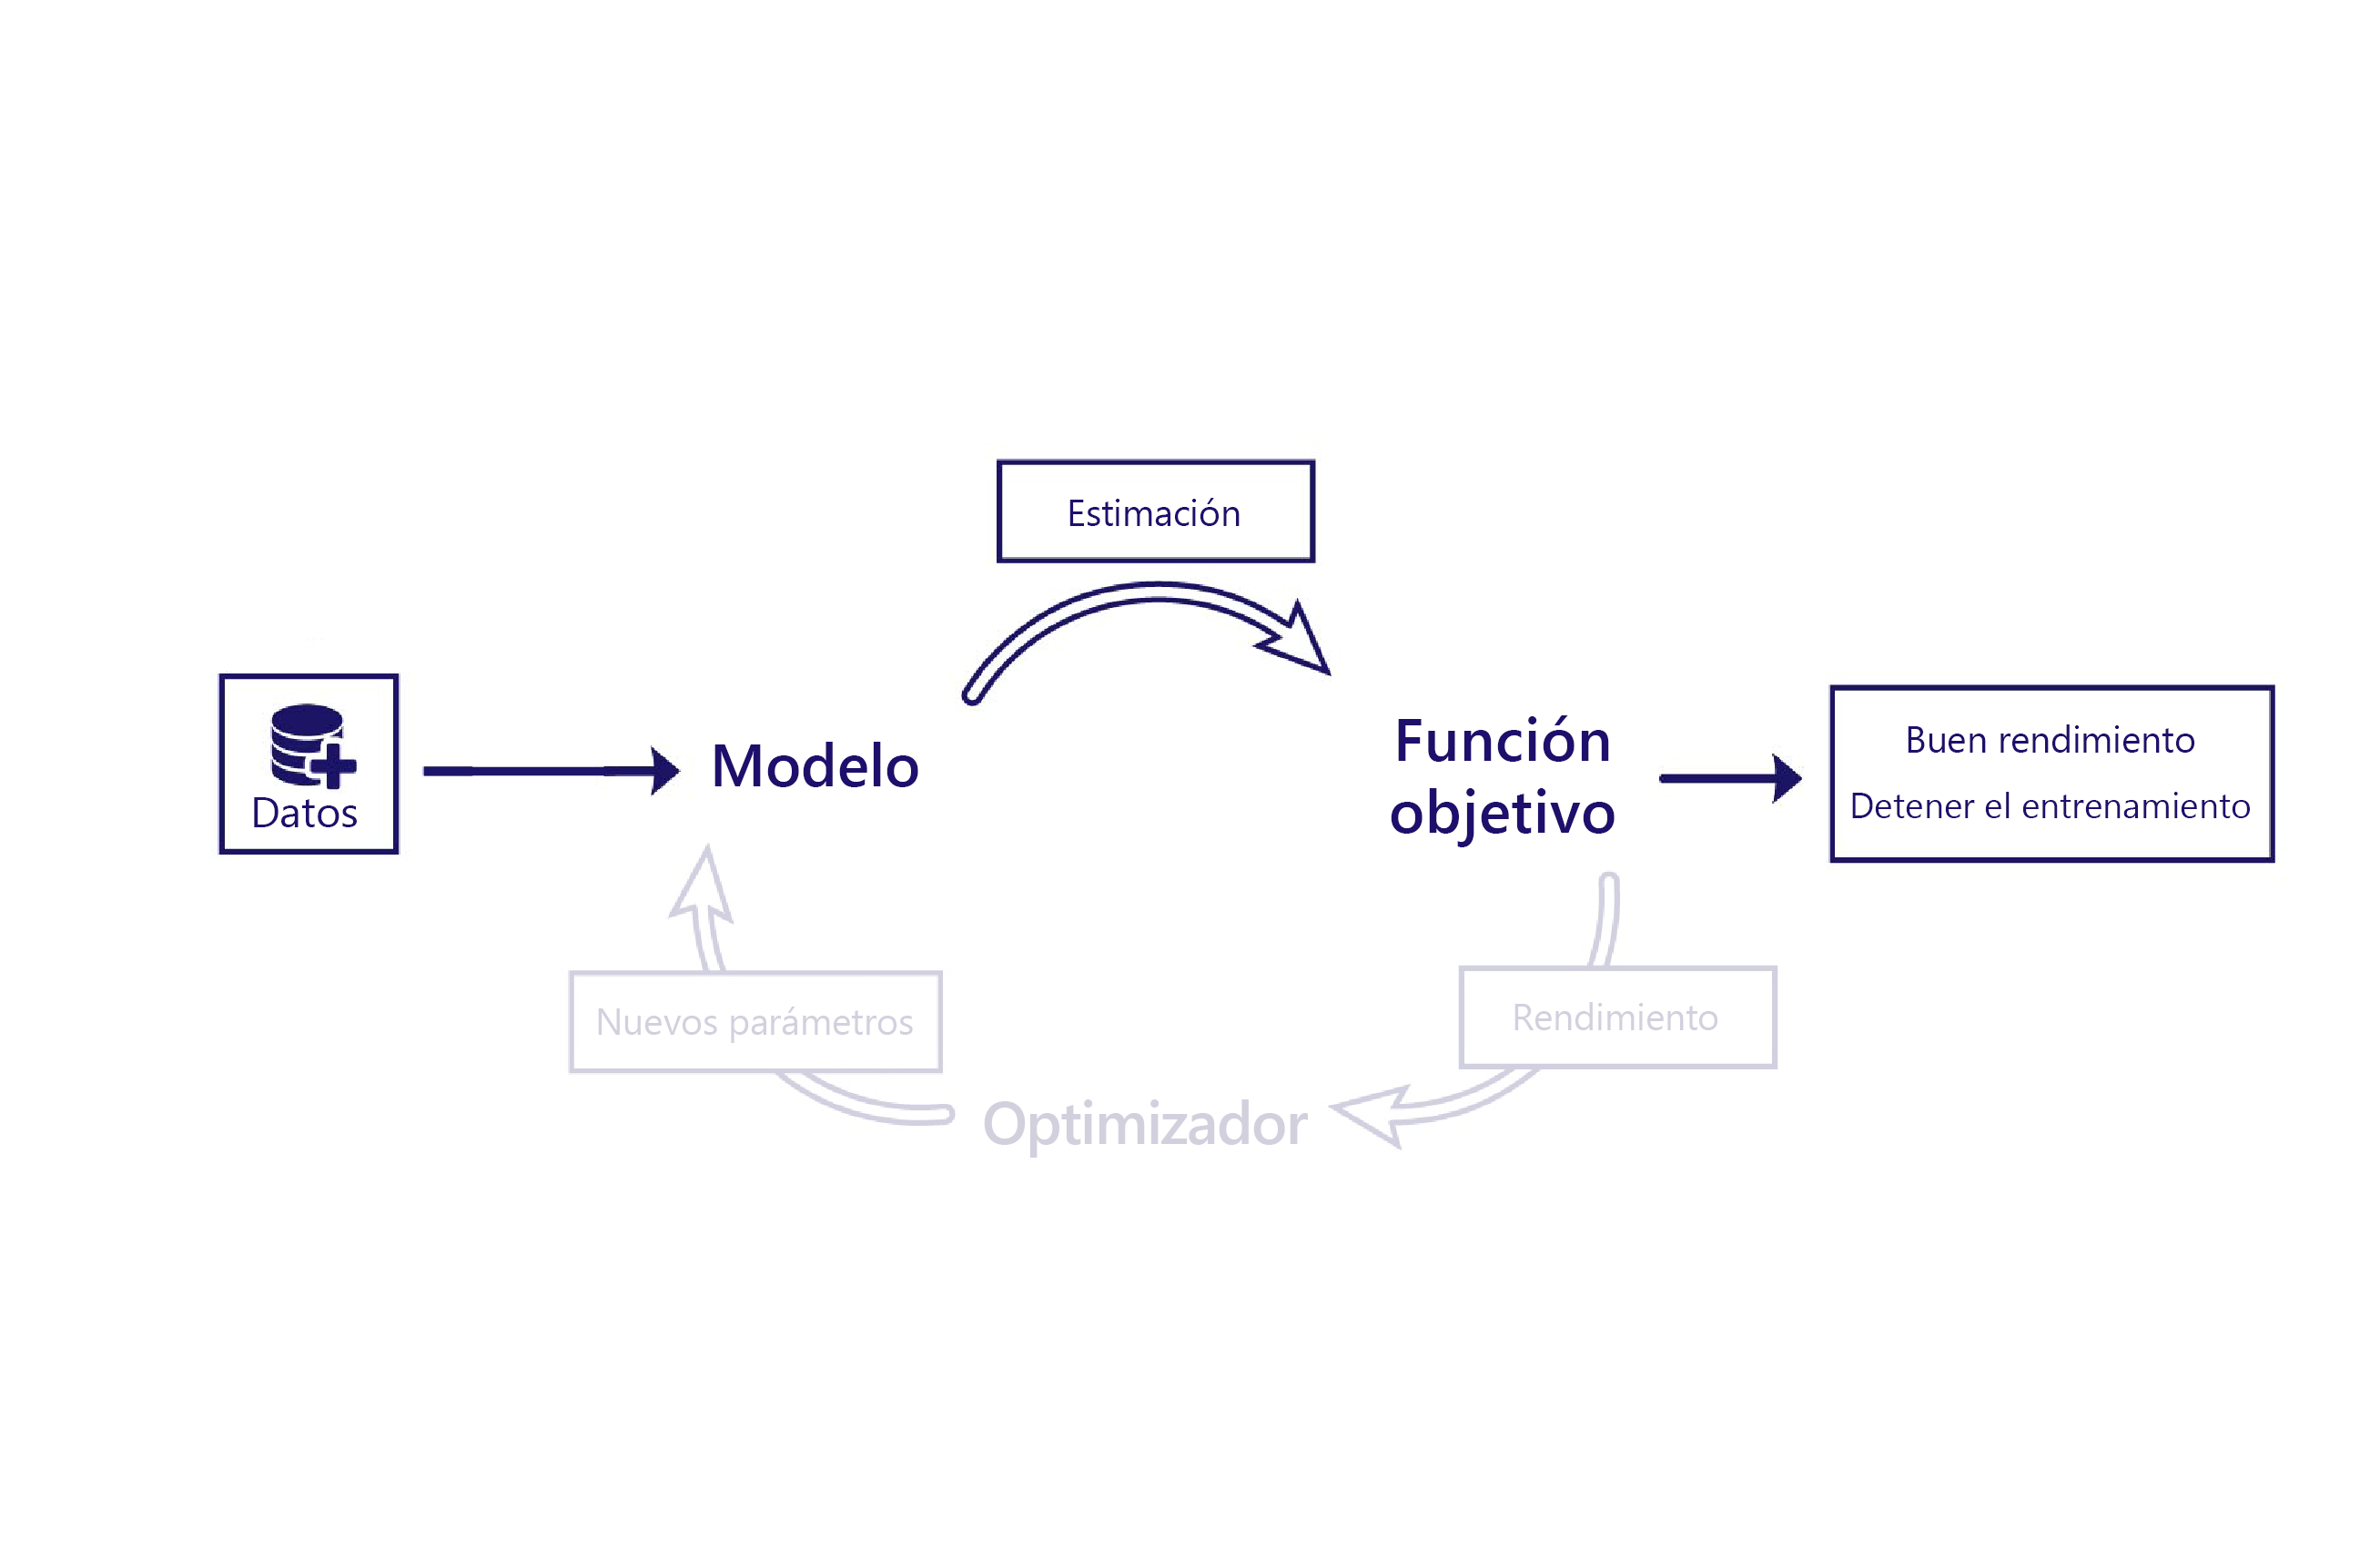 Diagram of the model and objective function parts of the machine-learning lifecycle.